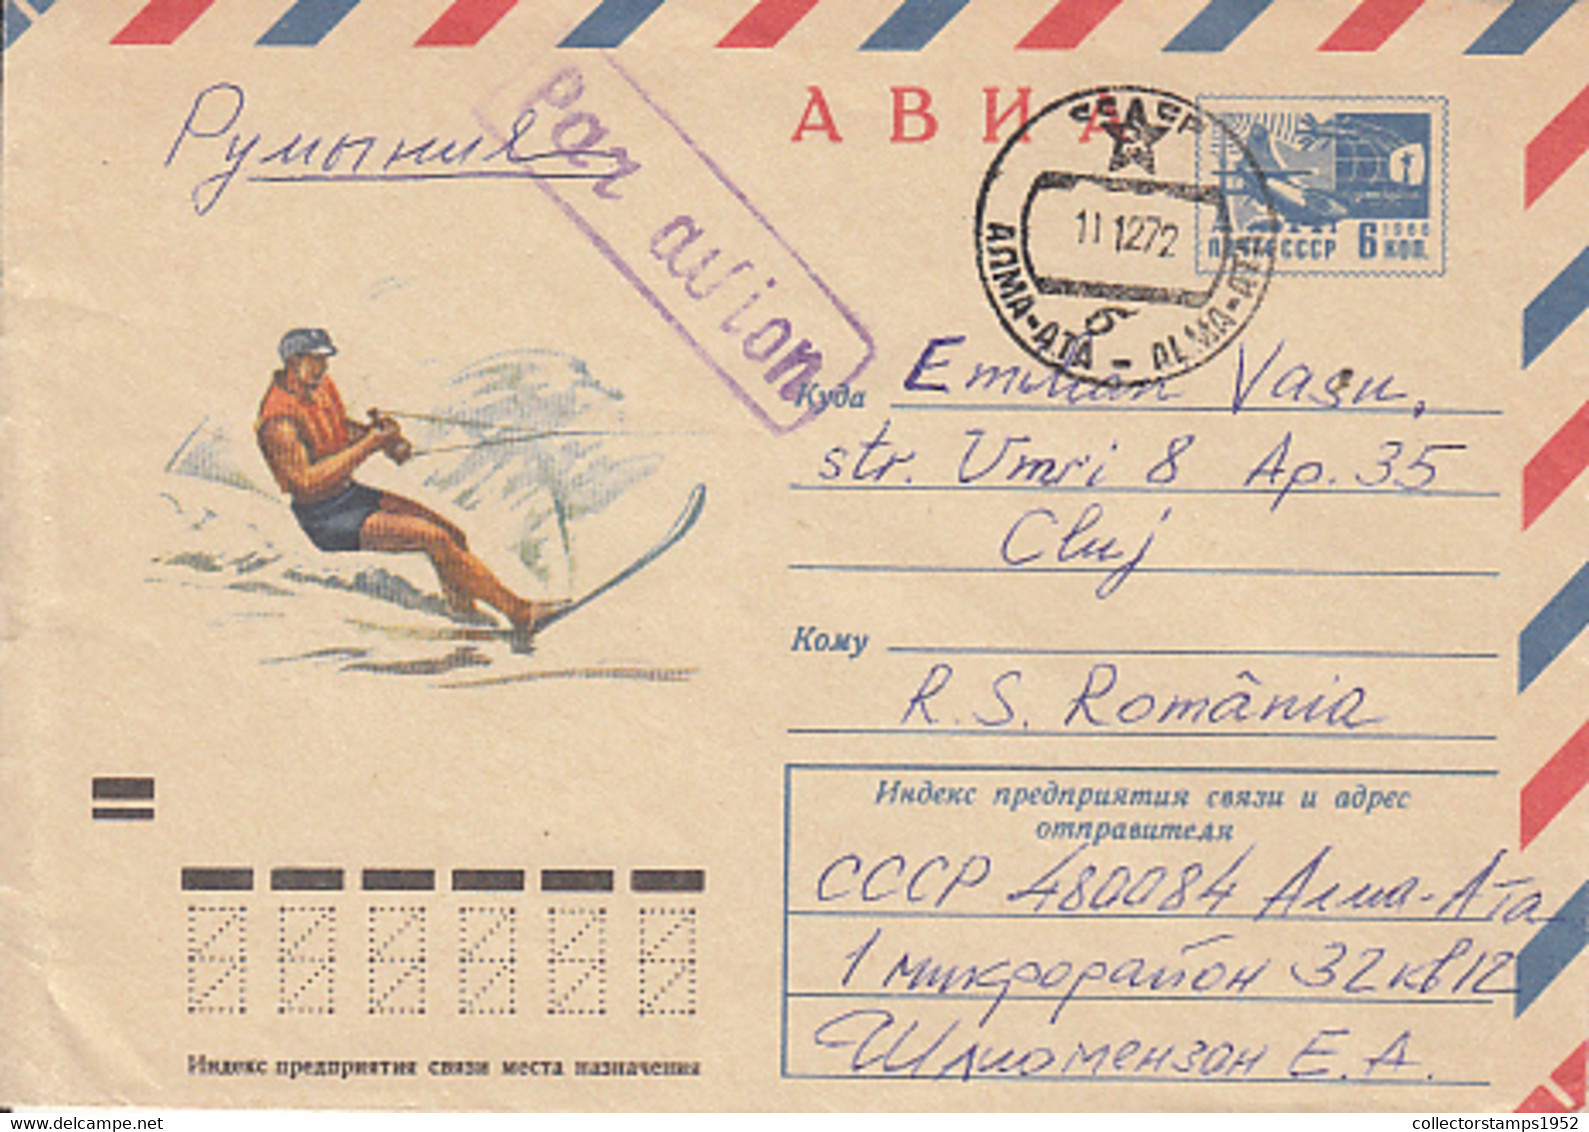 93284- WATER SKIING, SPORTS, COVER STATIONERY, 1972, RUSSIA-USSR - Wasserski